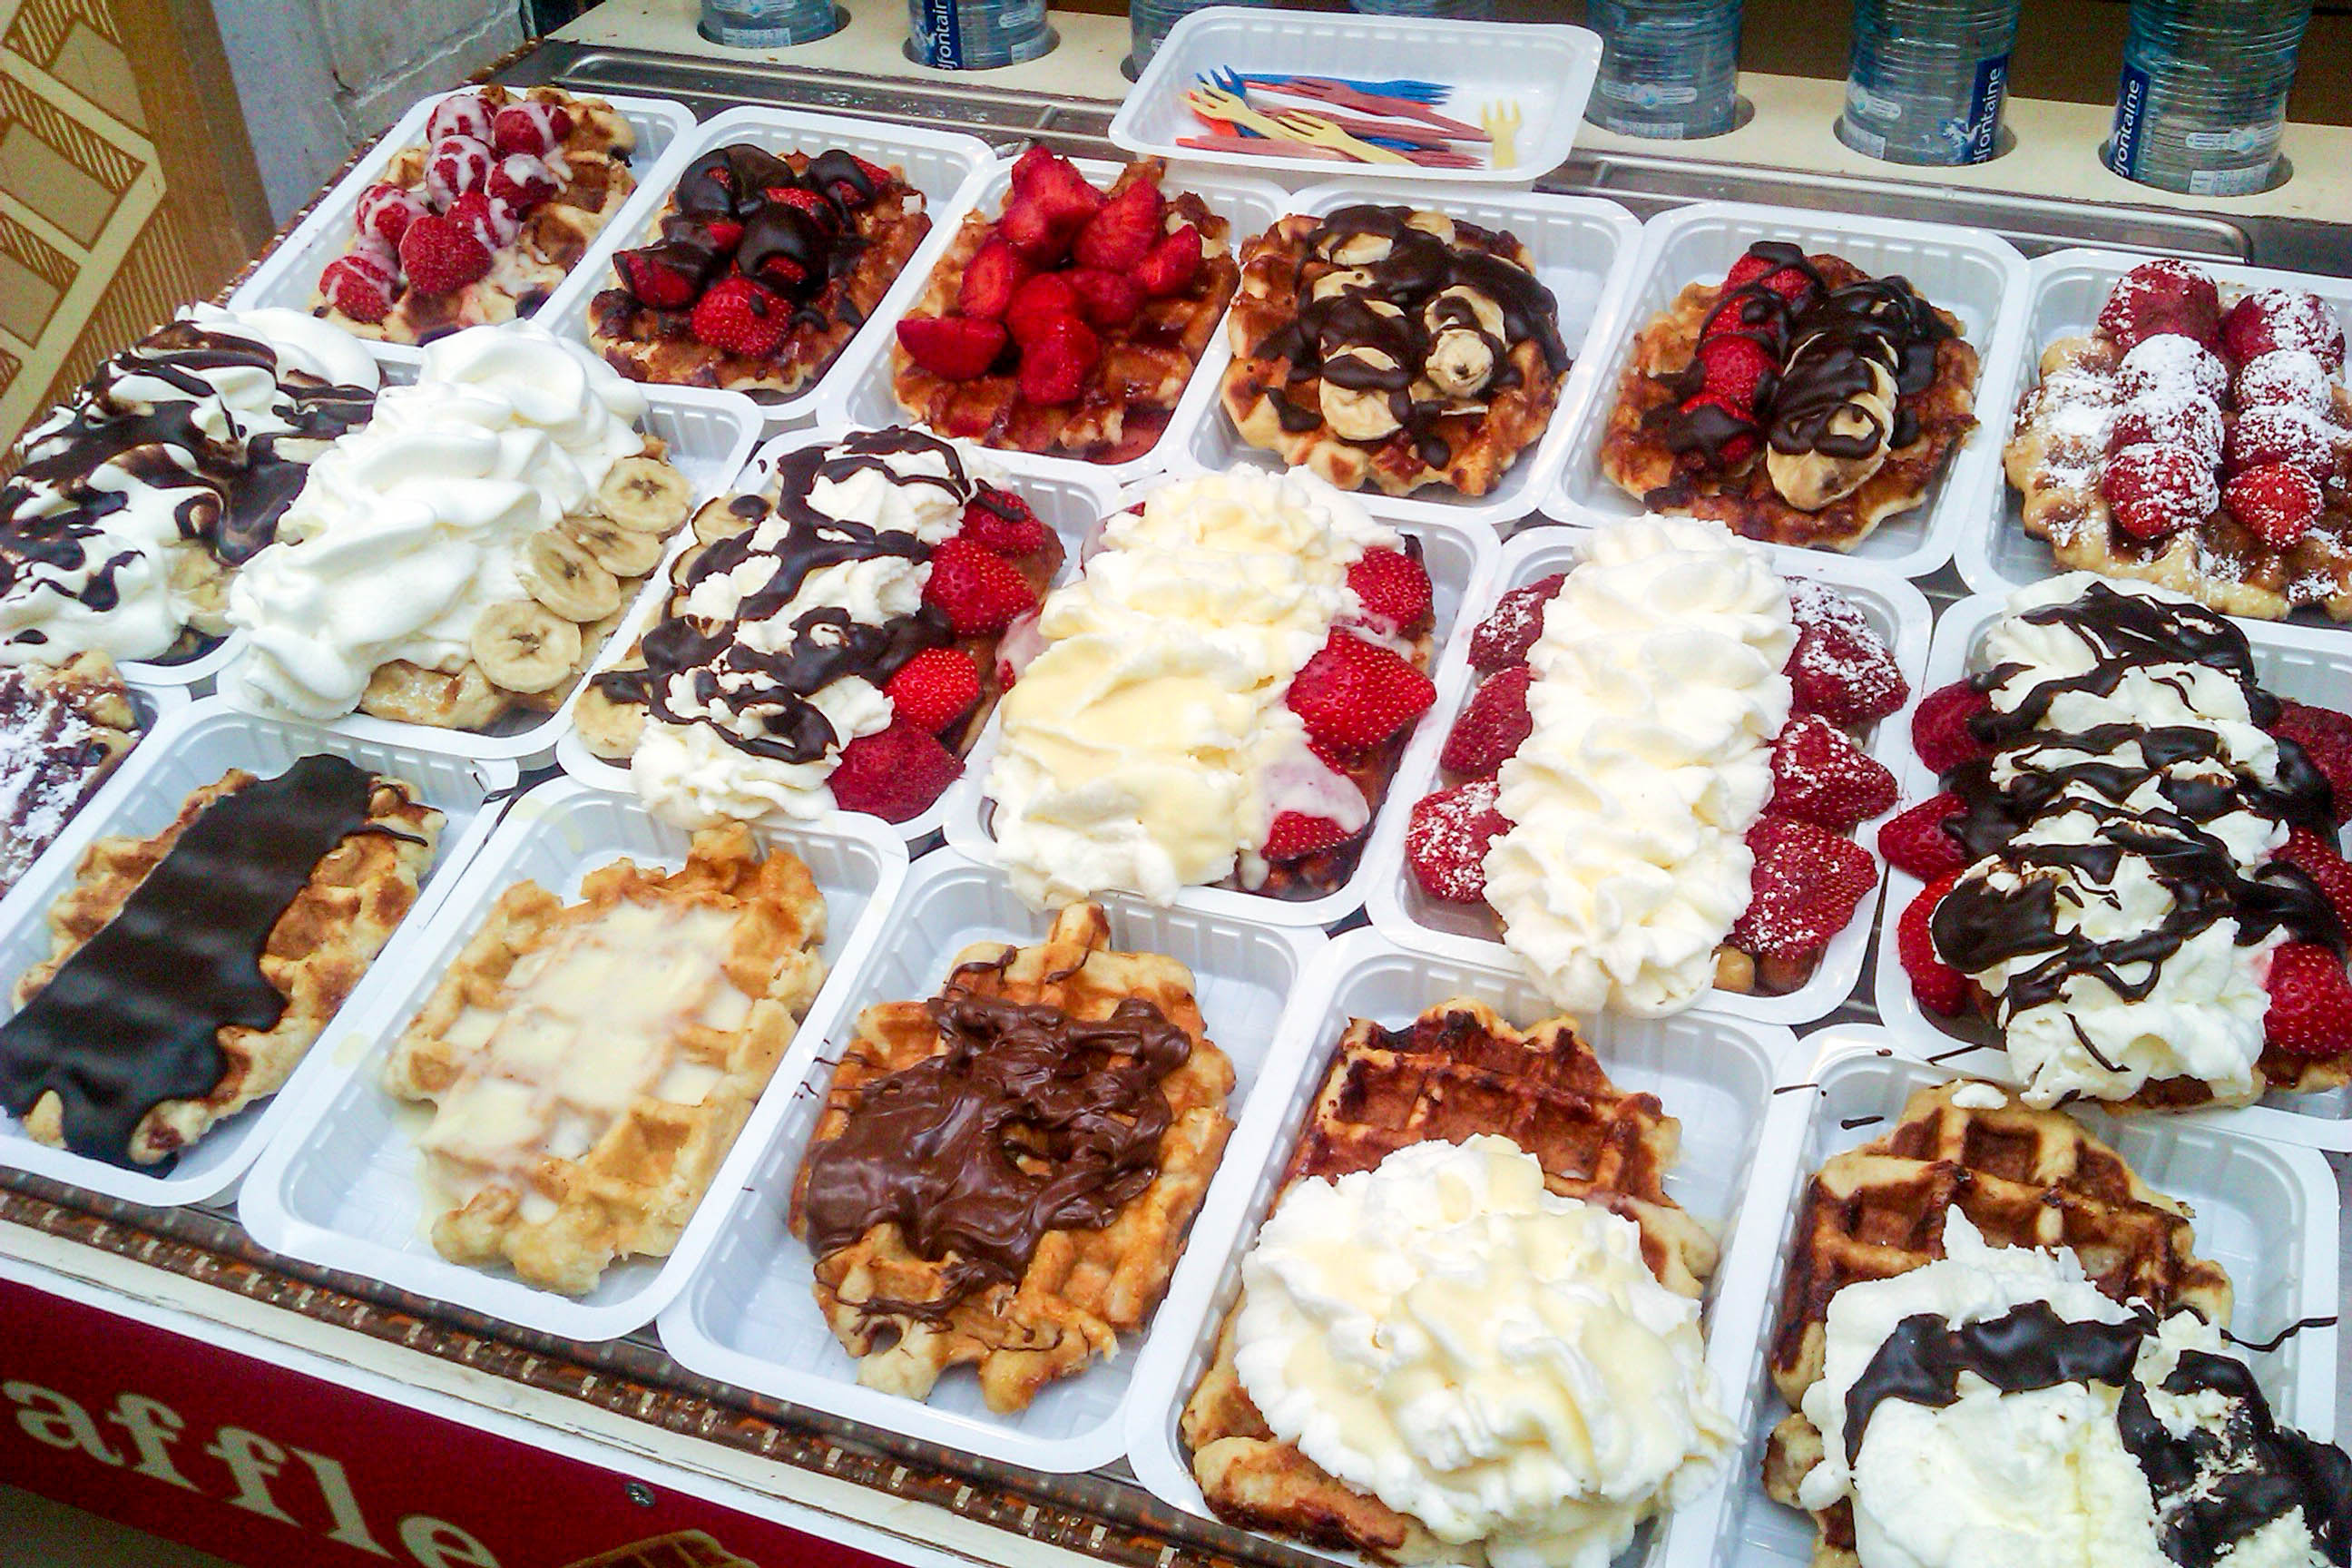 Where to get Belgian waffles in Brussels